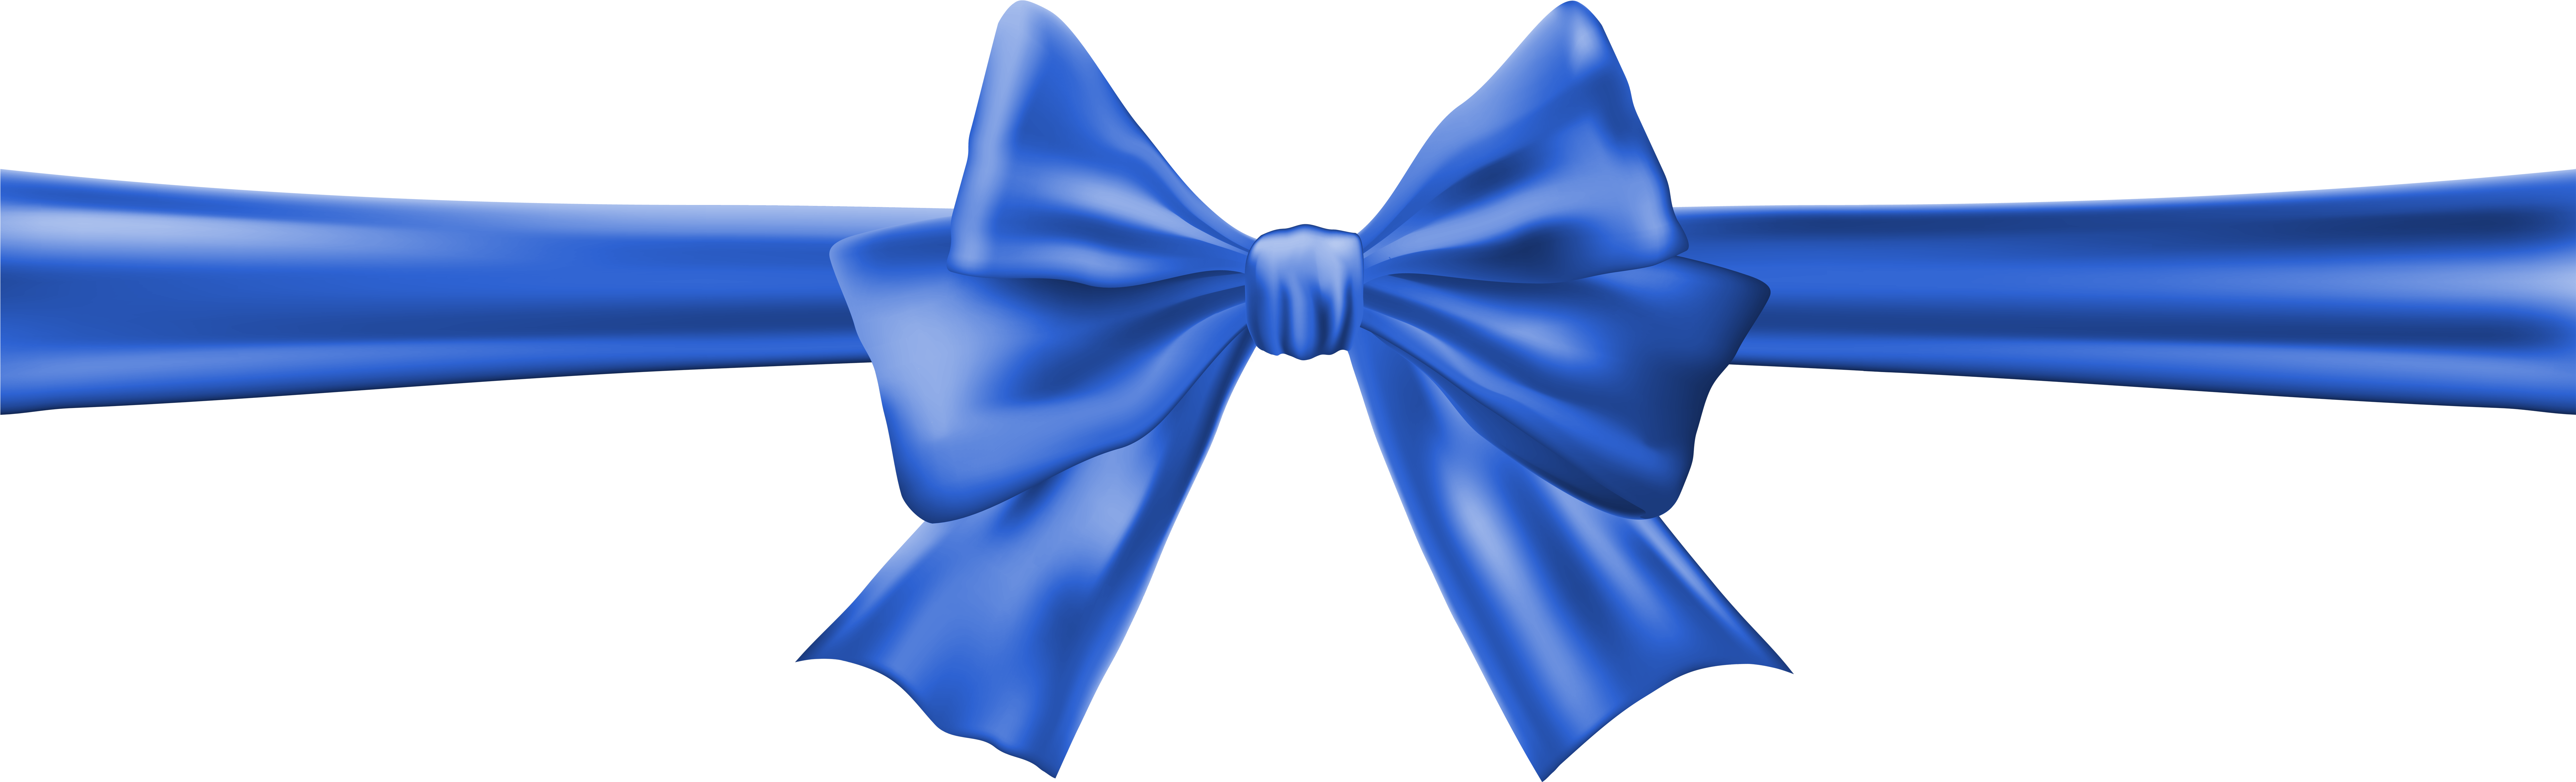 Download Blue Bow Tie Png PNG Image with No Background - PNGkey.com